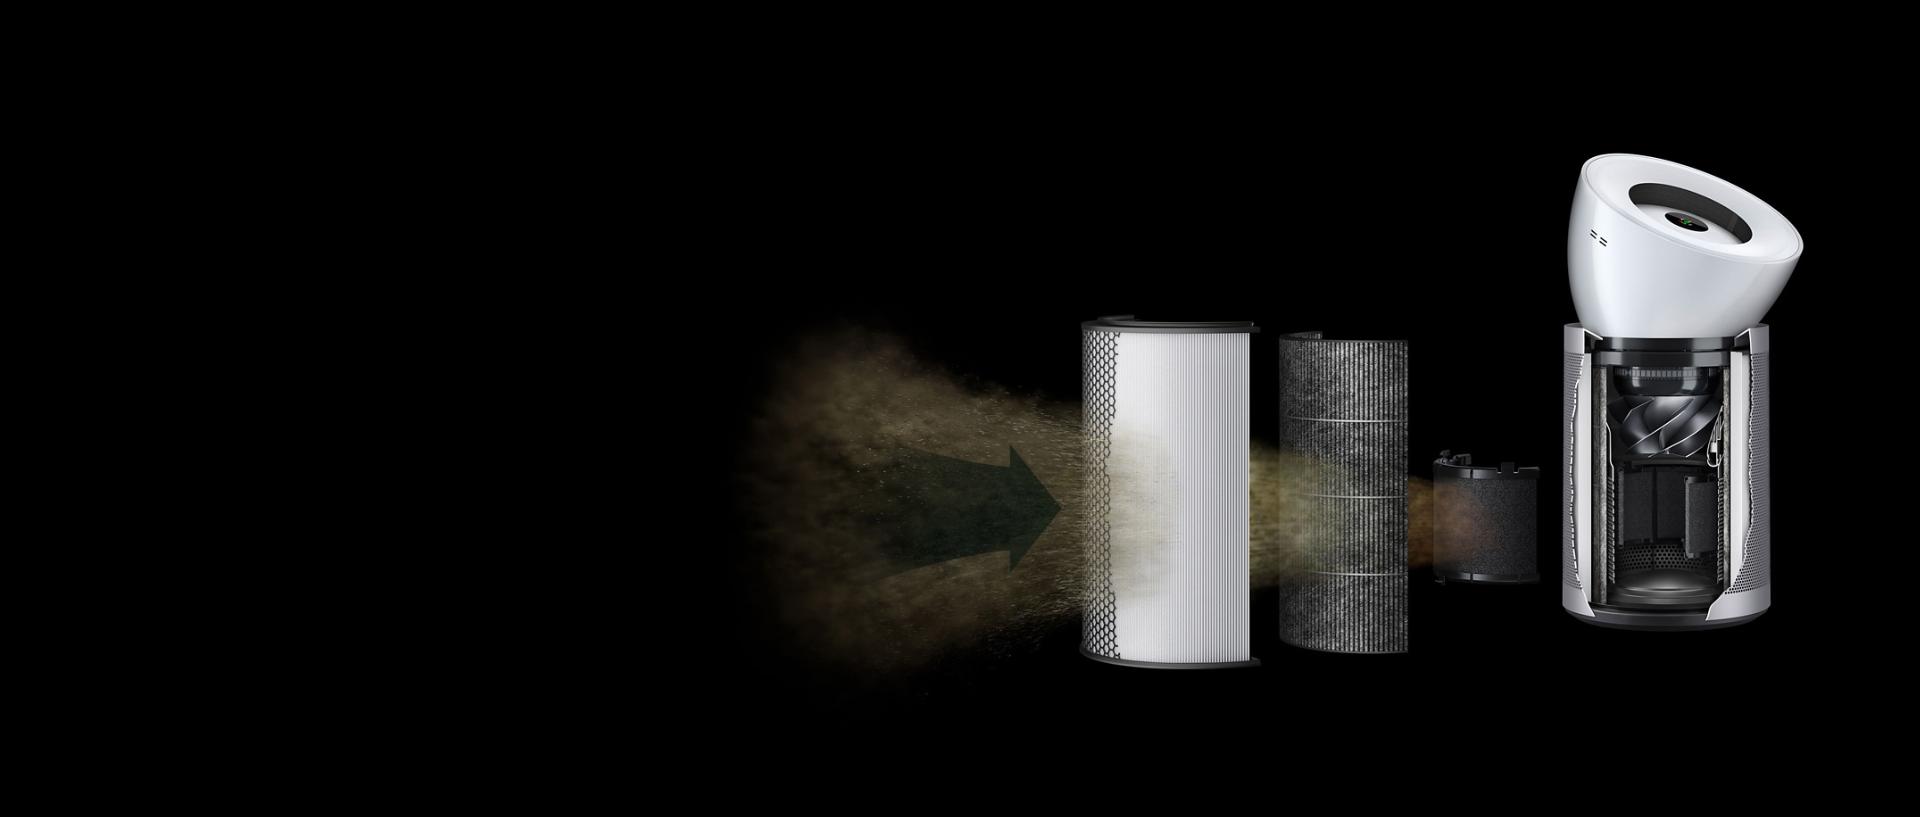 Exploded image of purifier showing dirty airflow going through filtration system